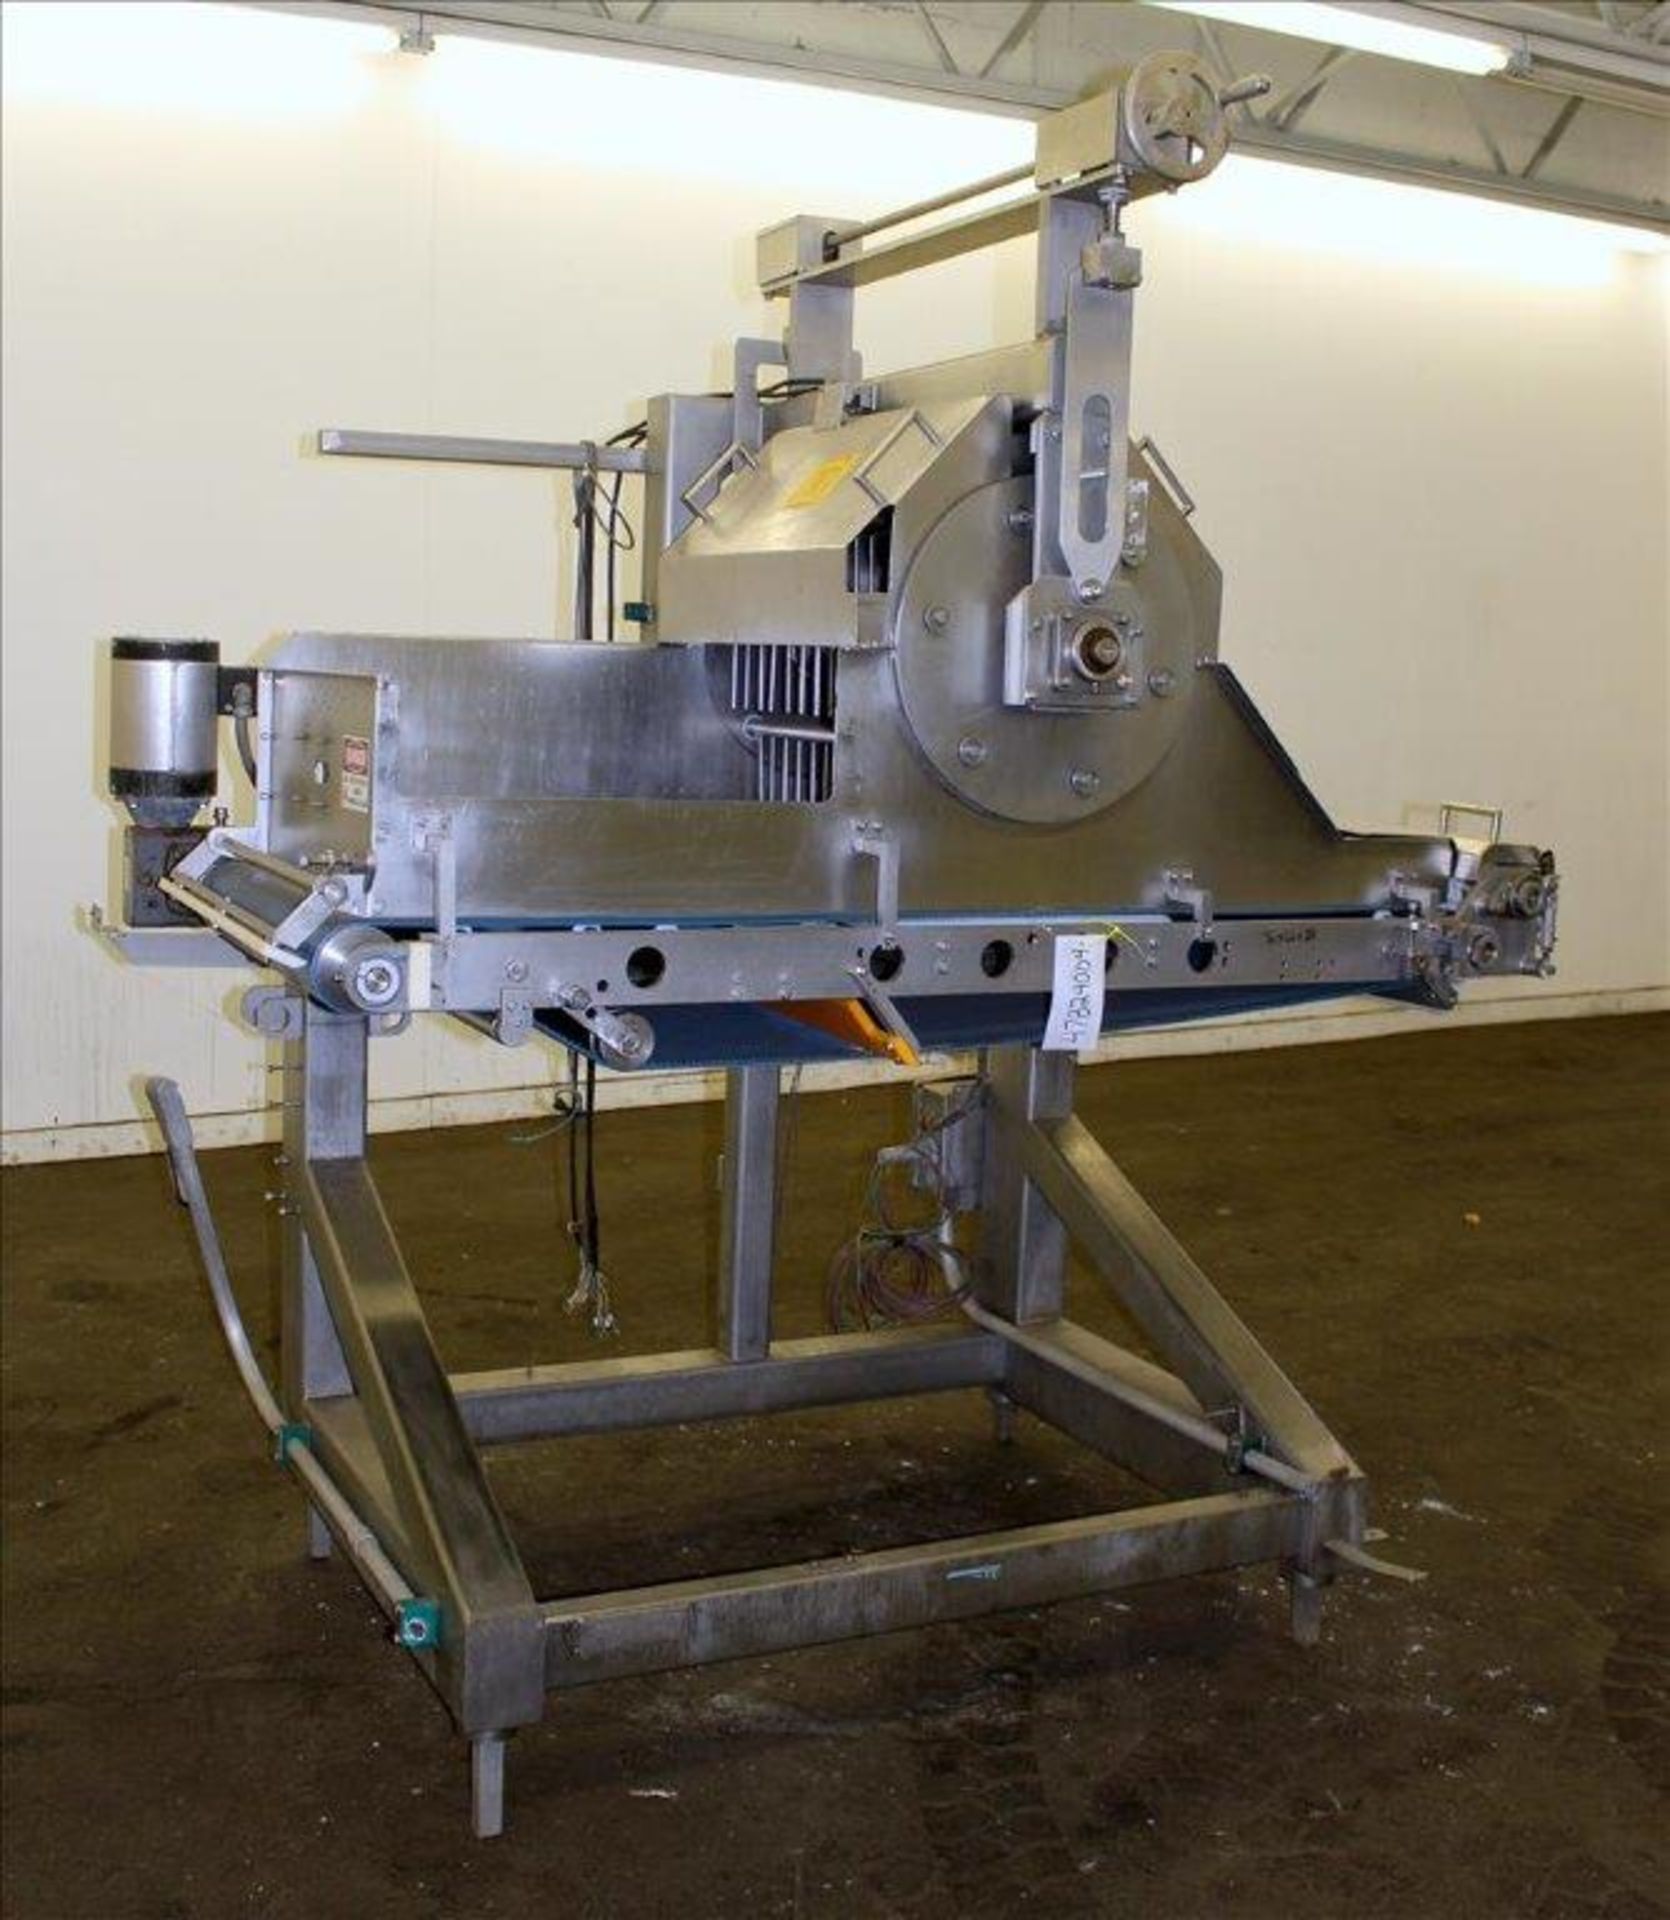 Waterfall Cheese/Applicator for Pizza, 304 Stainless Steel. Has 28" wide x 60" long belt conveyor - Image 2 of 46